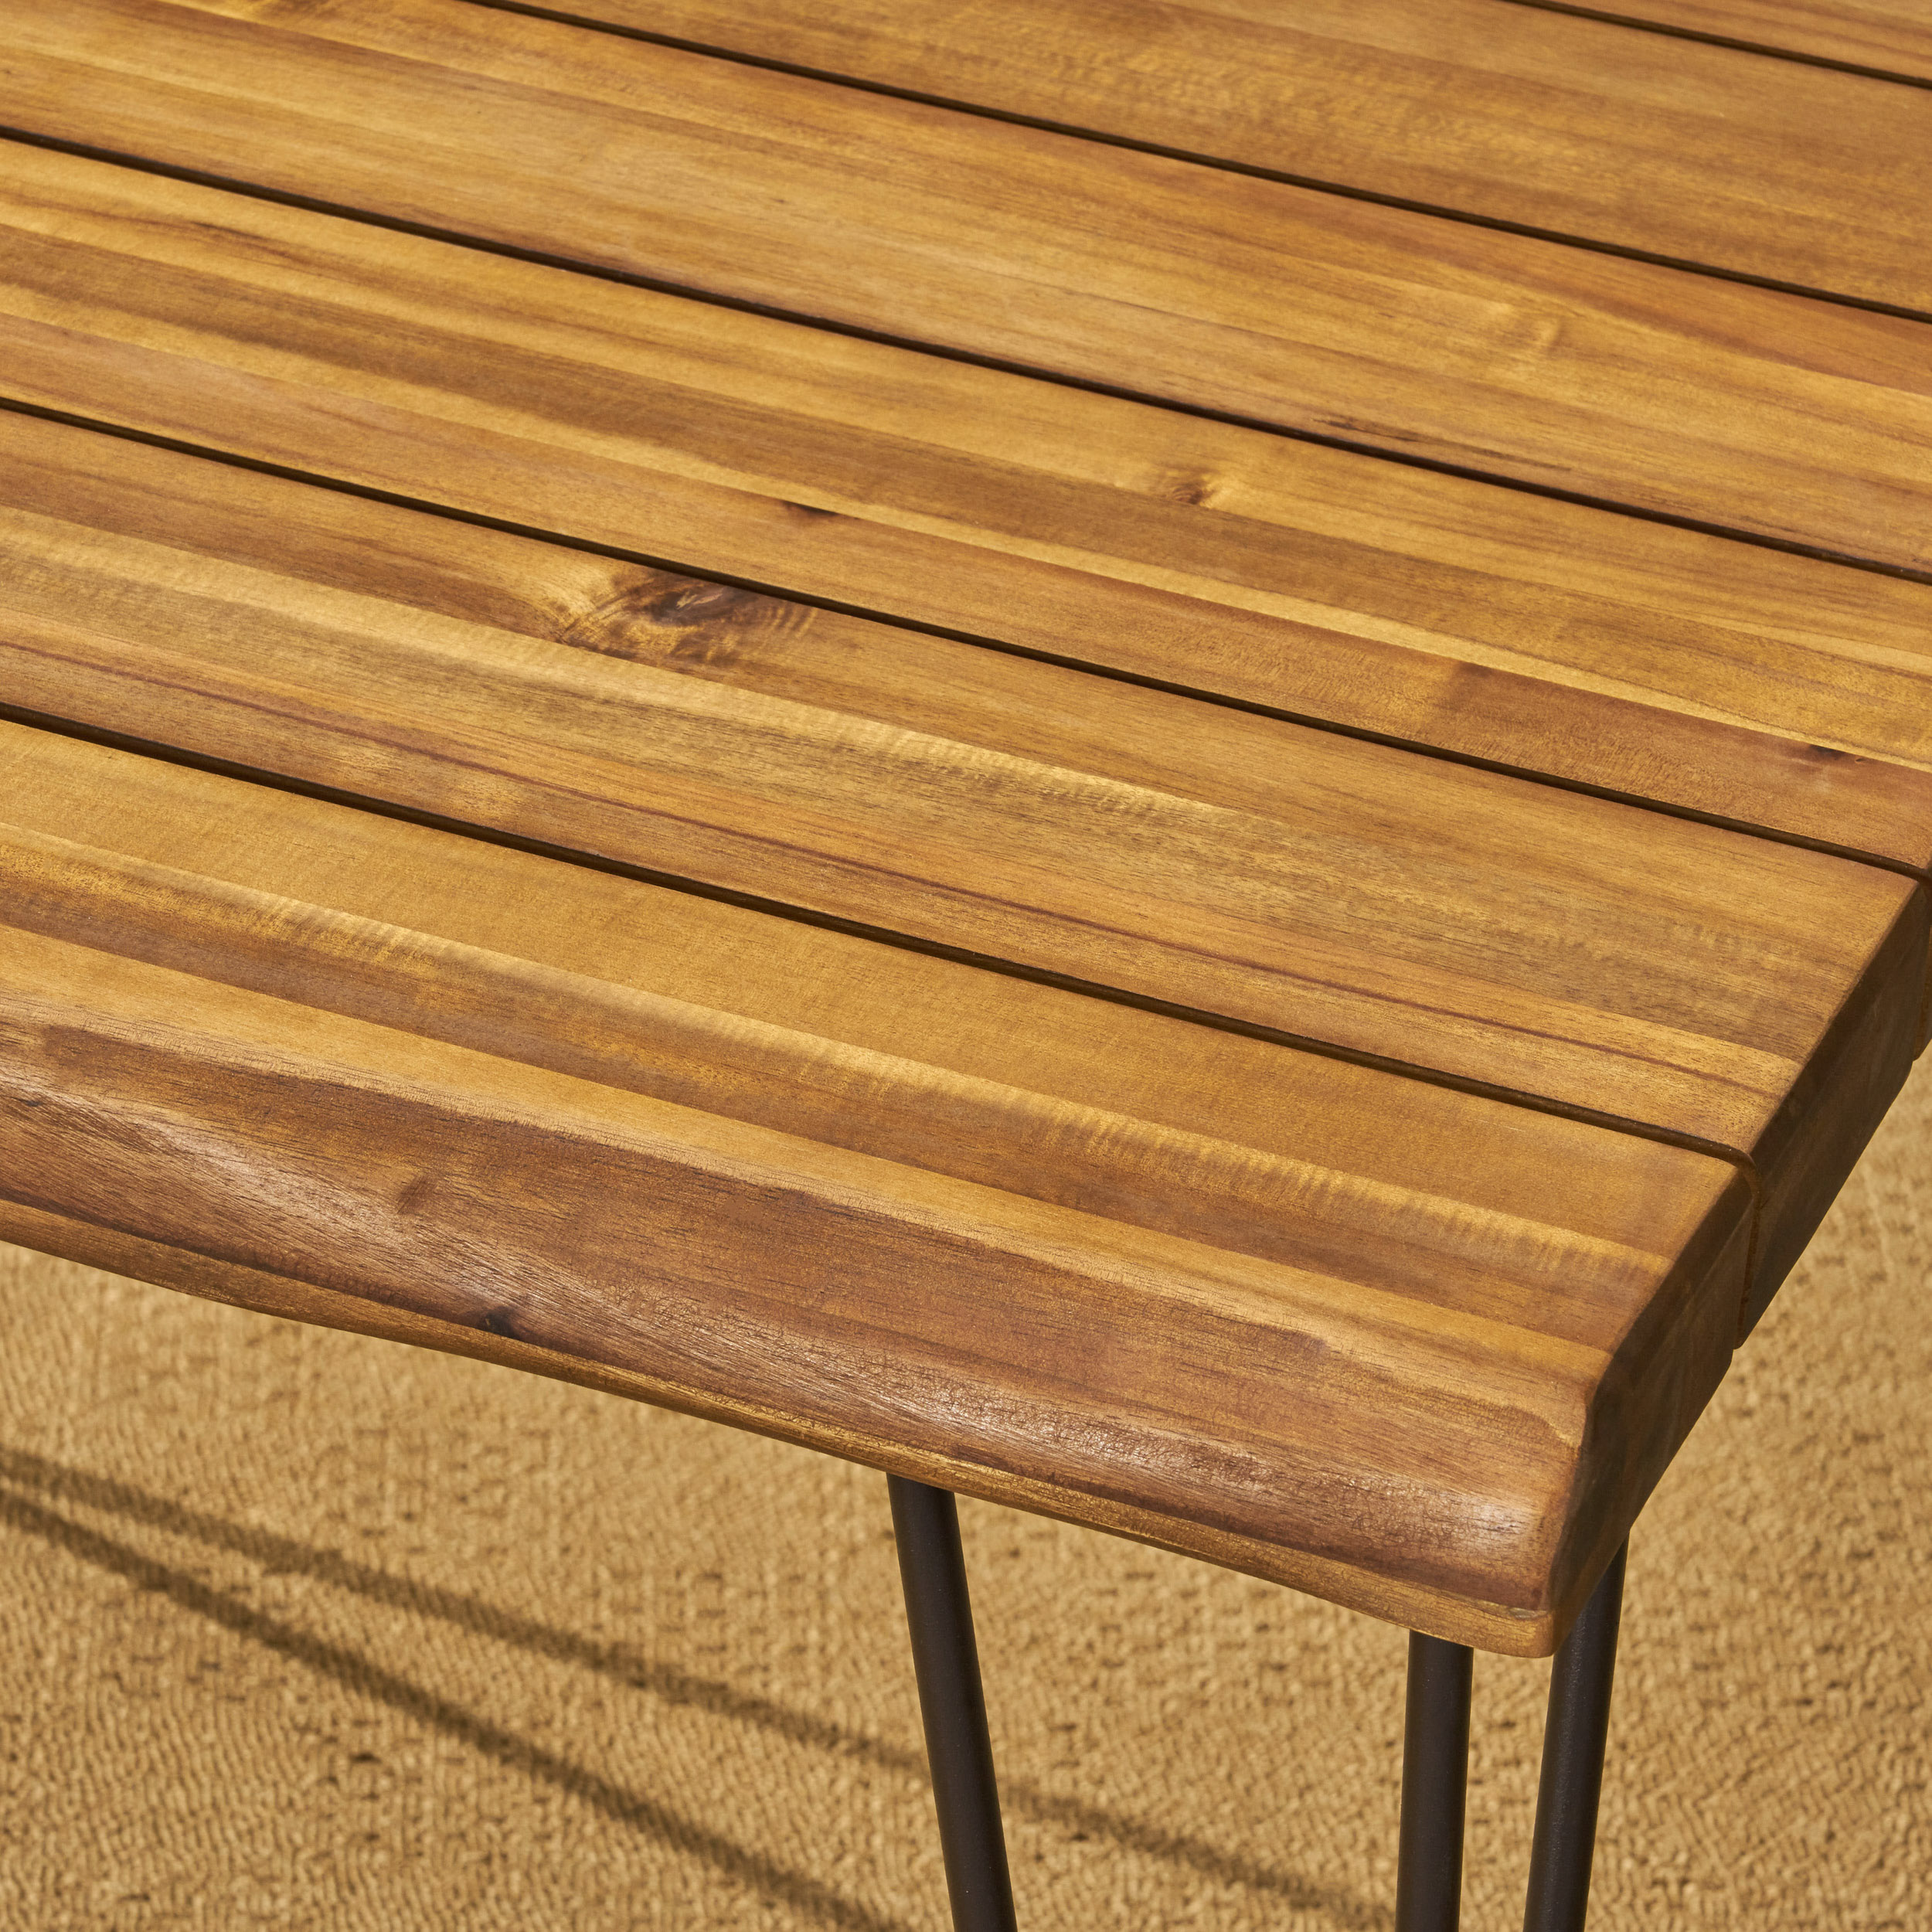 Noble House Zion Acacia Wood and Iron Outdoor Dining Table in Natural - image 3 of 6